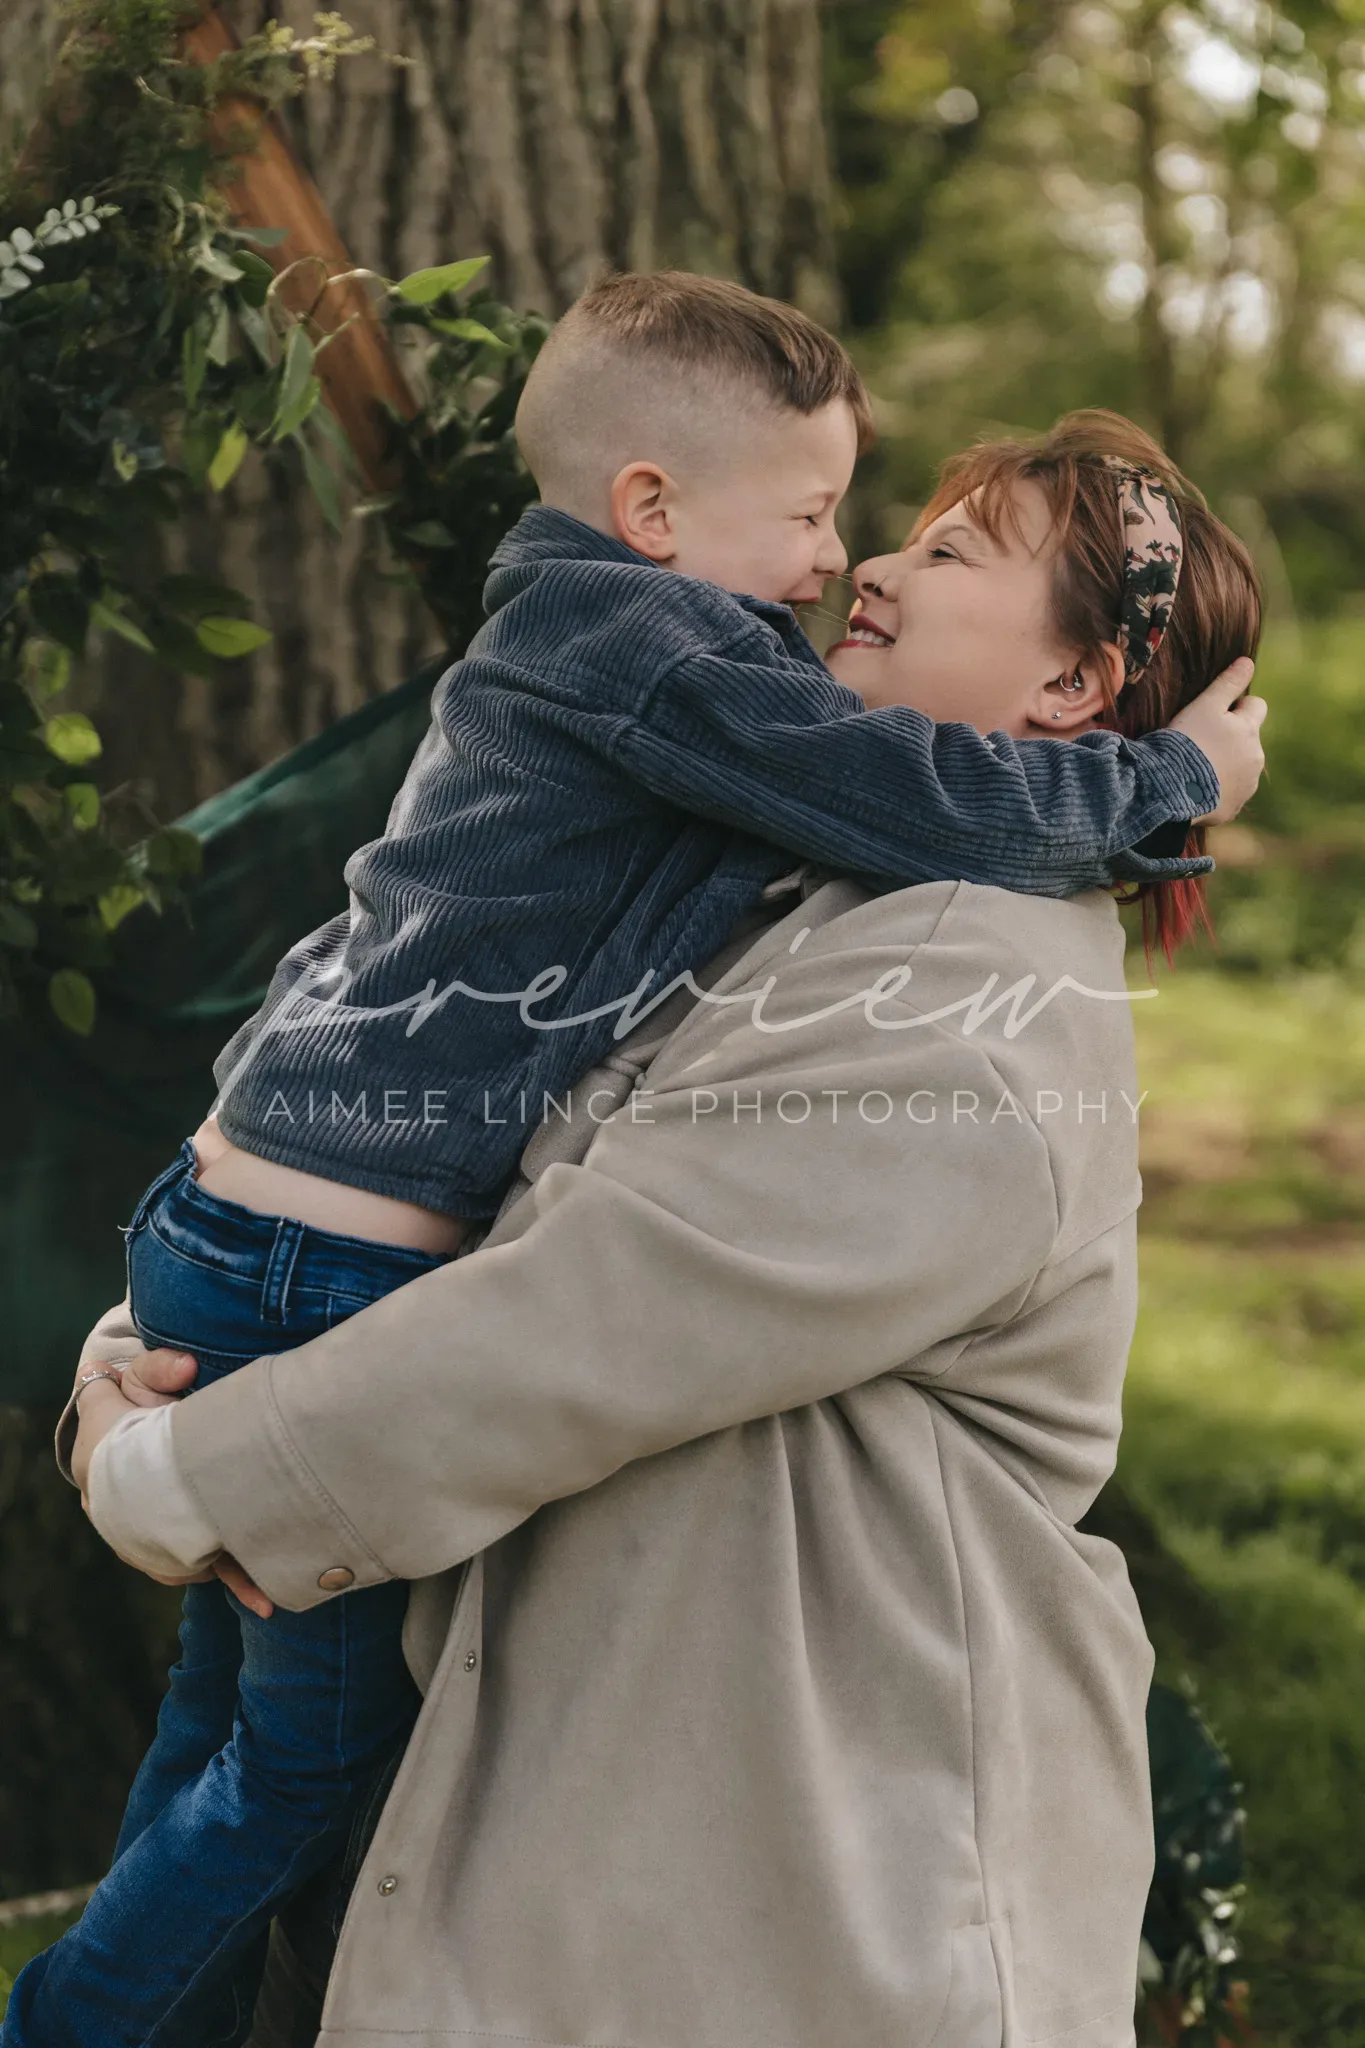 A woman in a beige coat hugs a young boy wearing denim. They smile lovingly at each other, nose-to-nose, in a lush park setting. The watermark "Gabrielle Family Photography